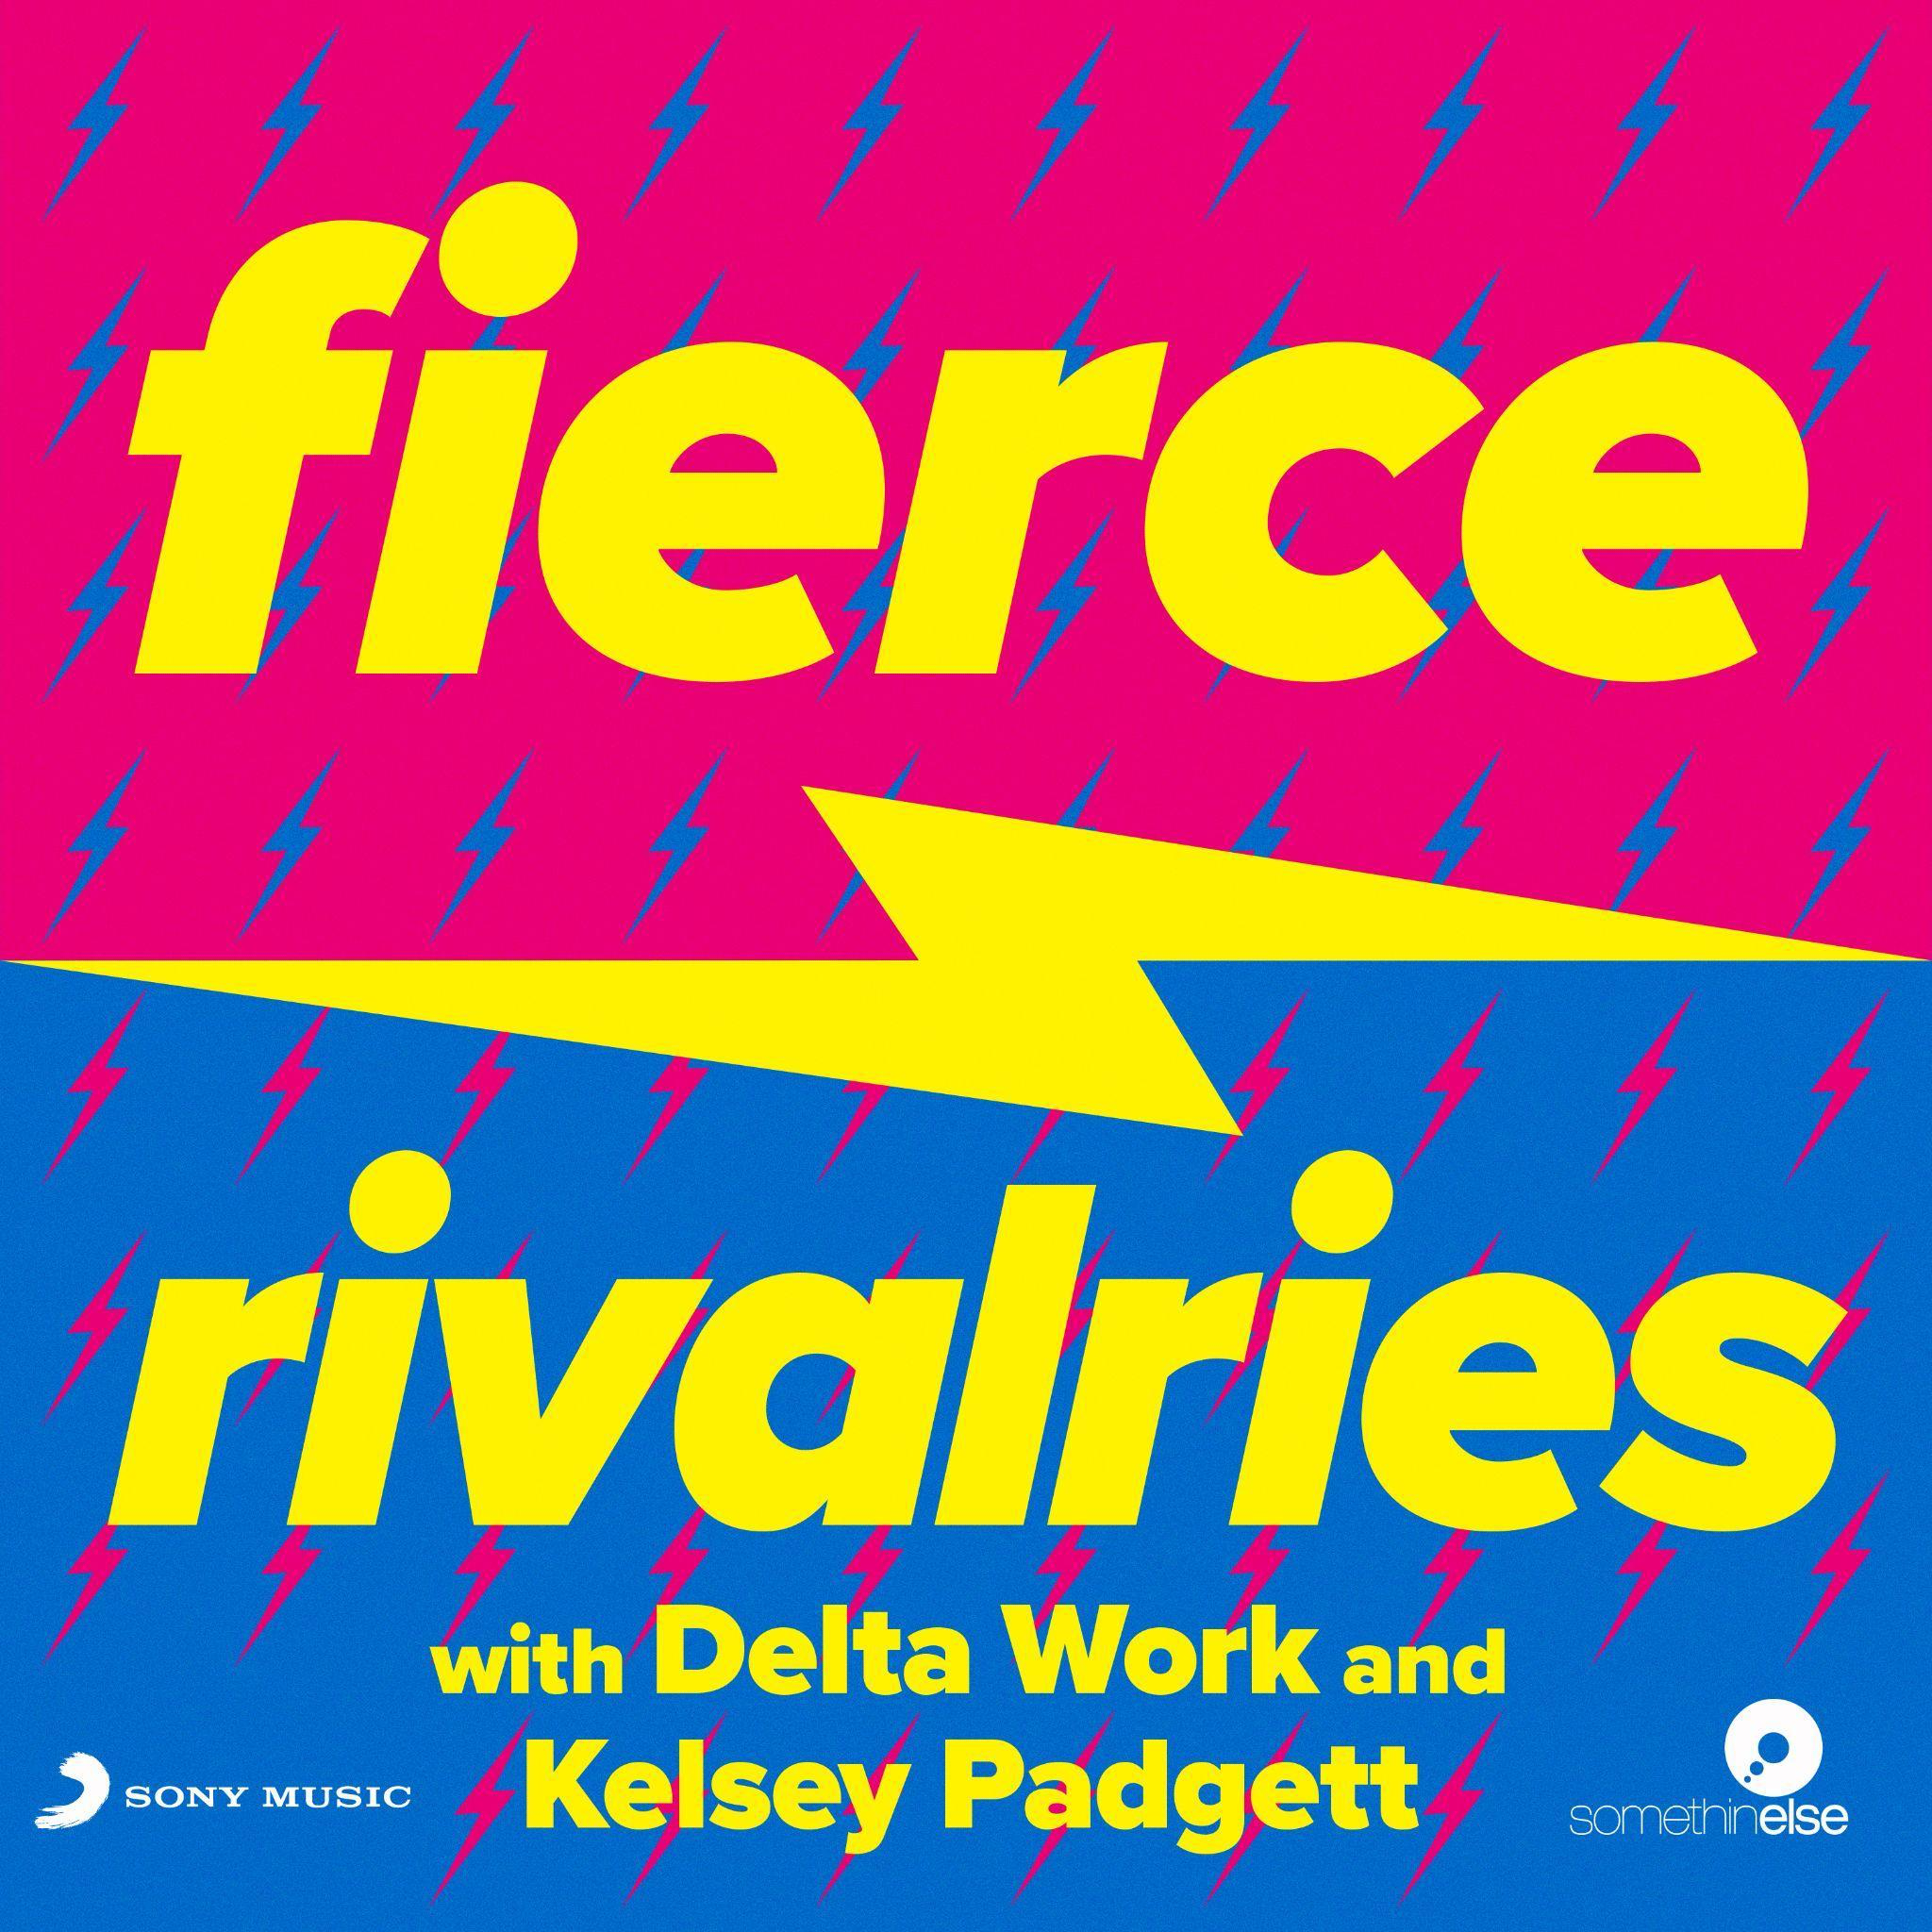 Fierce Rivalries with Delta Work and Kelsey Padgett